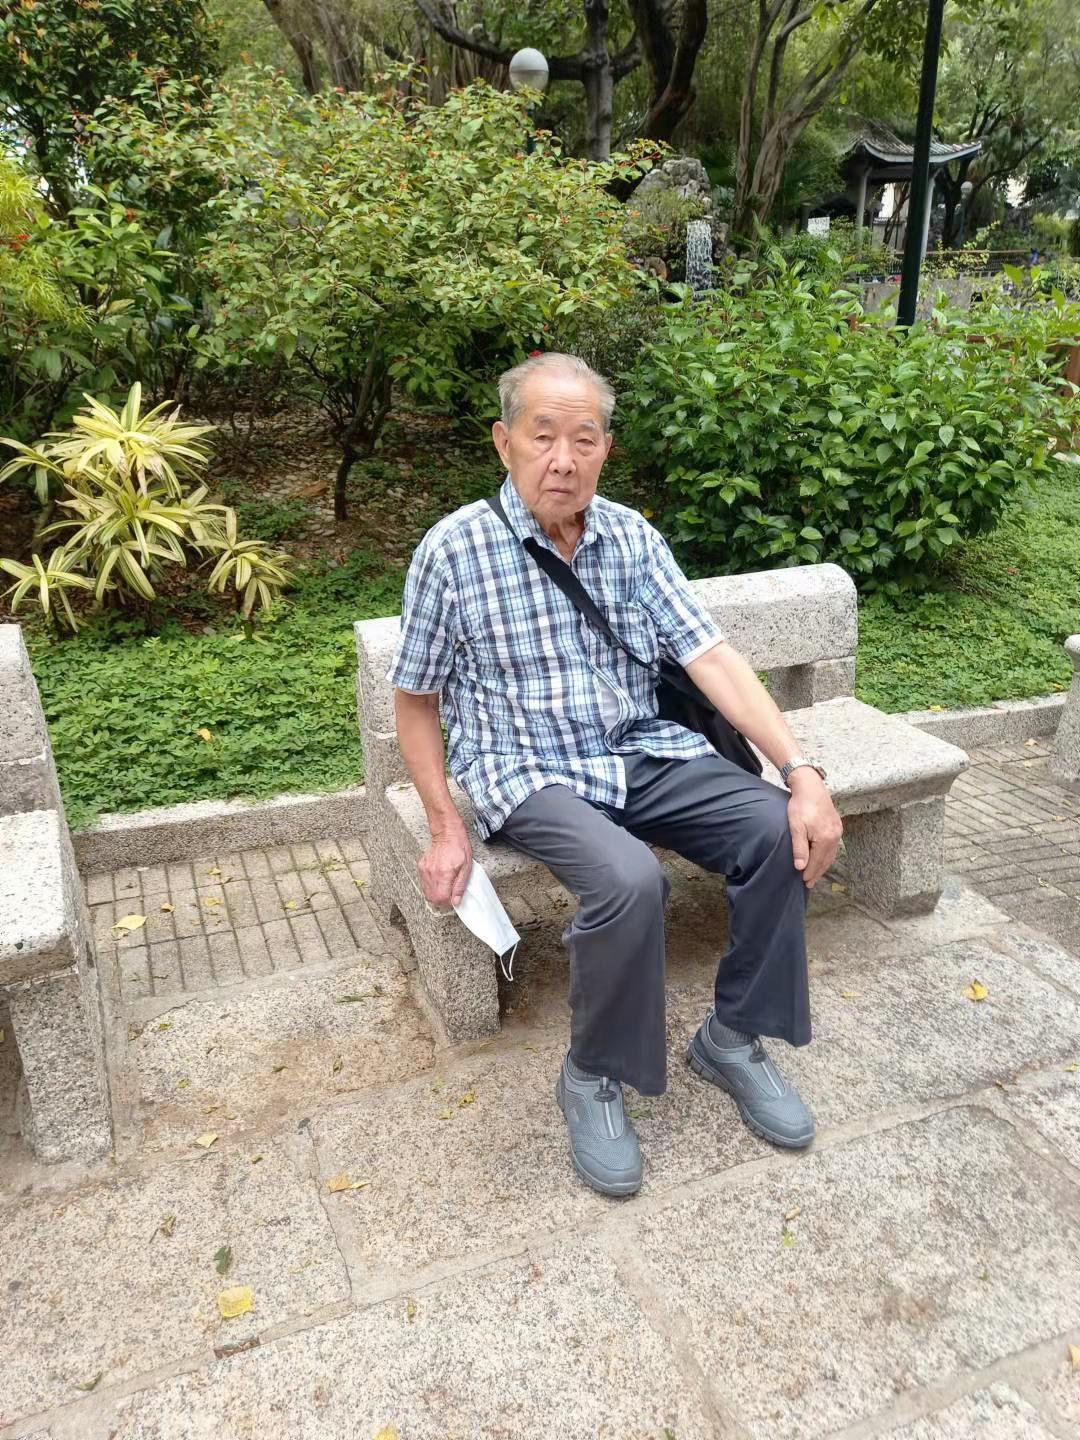 Appeal for information on missing man in Kwai Chung (with photo) thumbnail